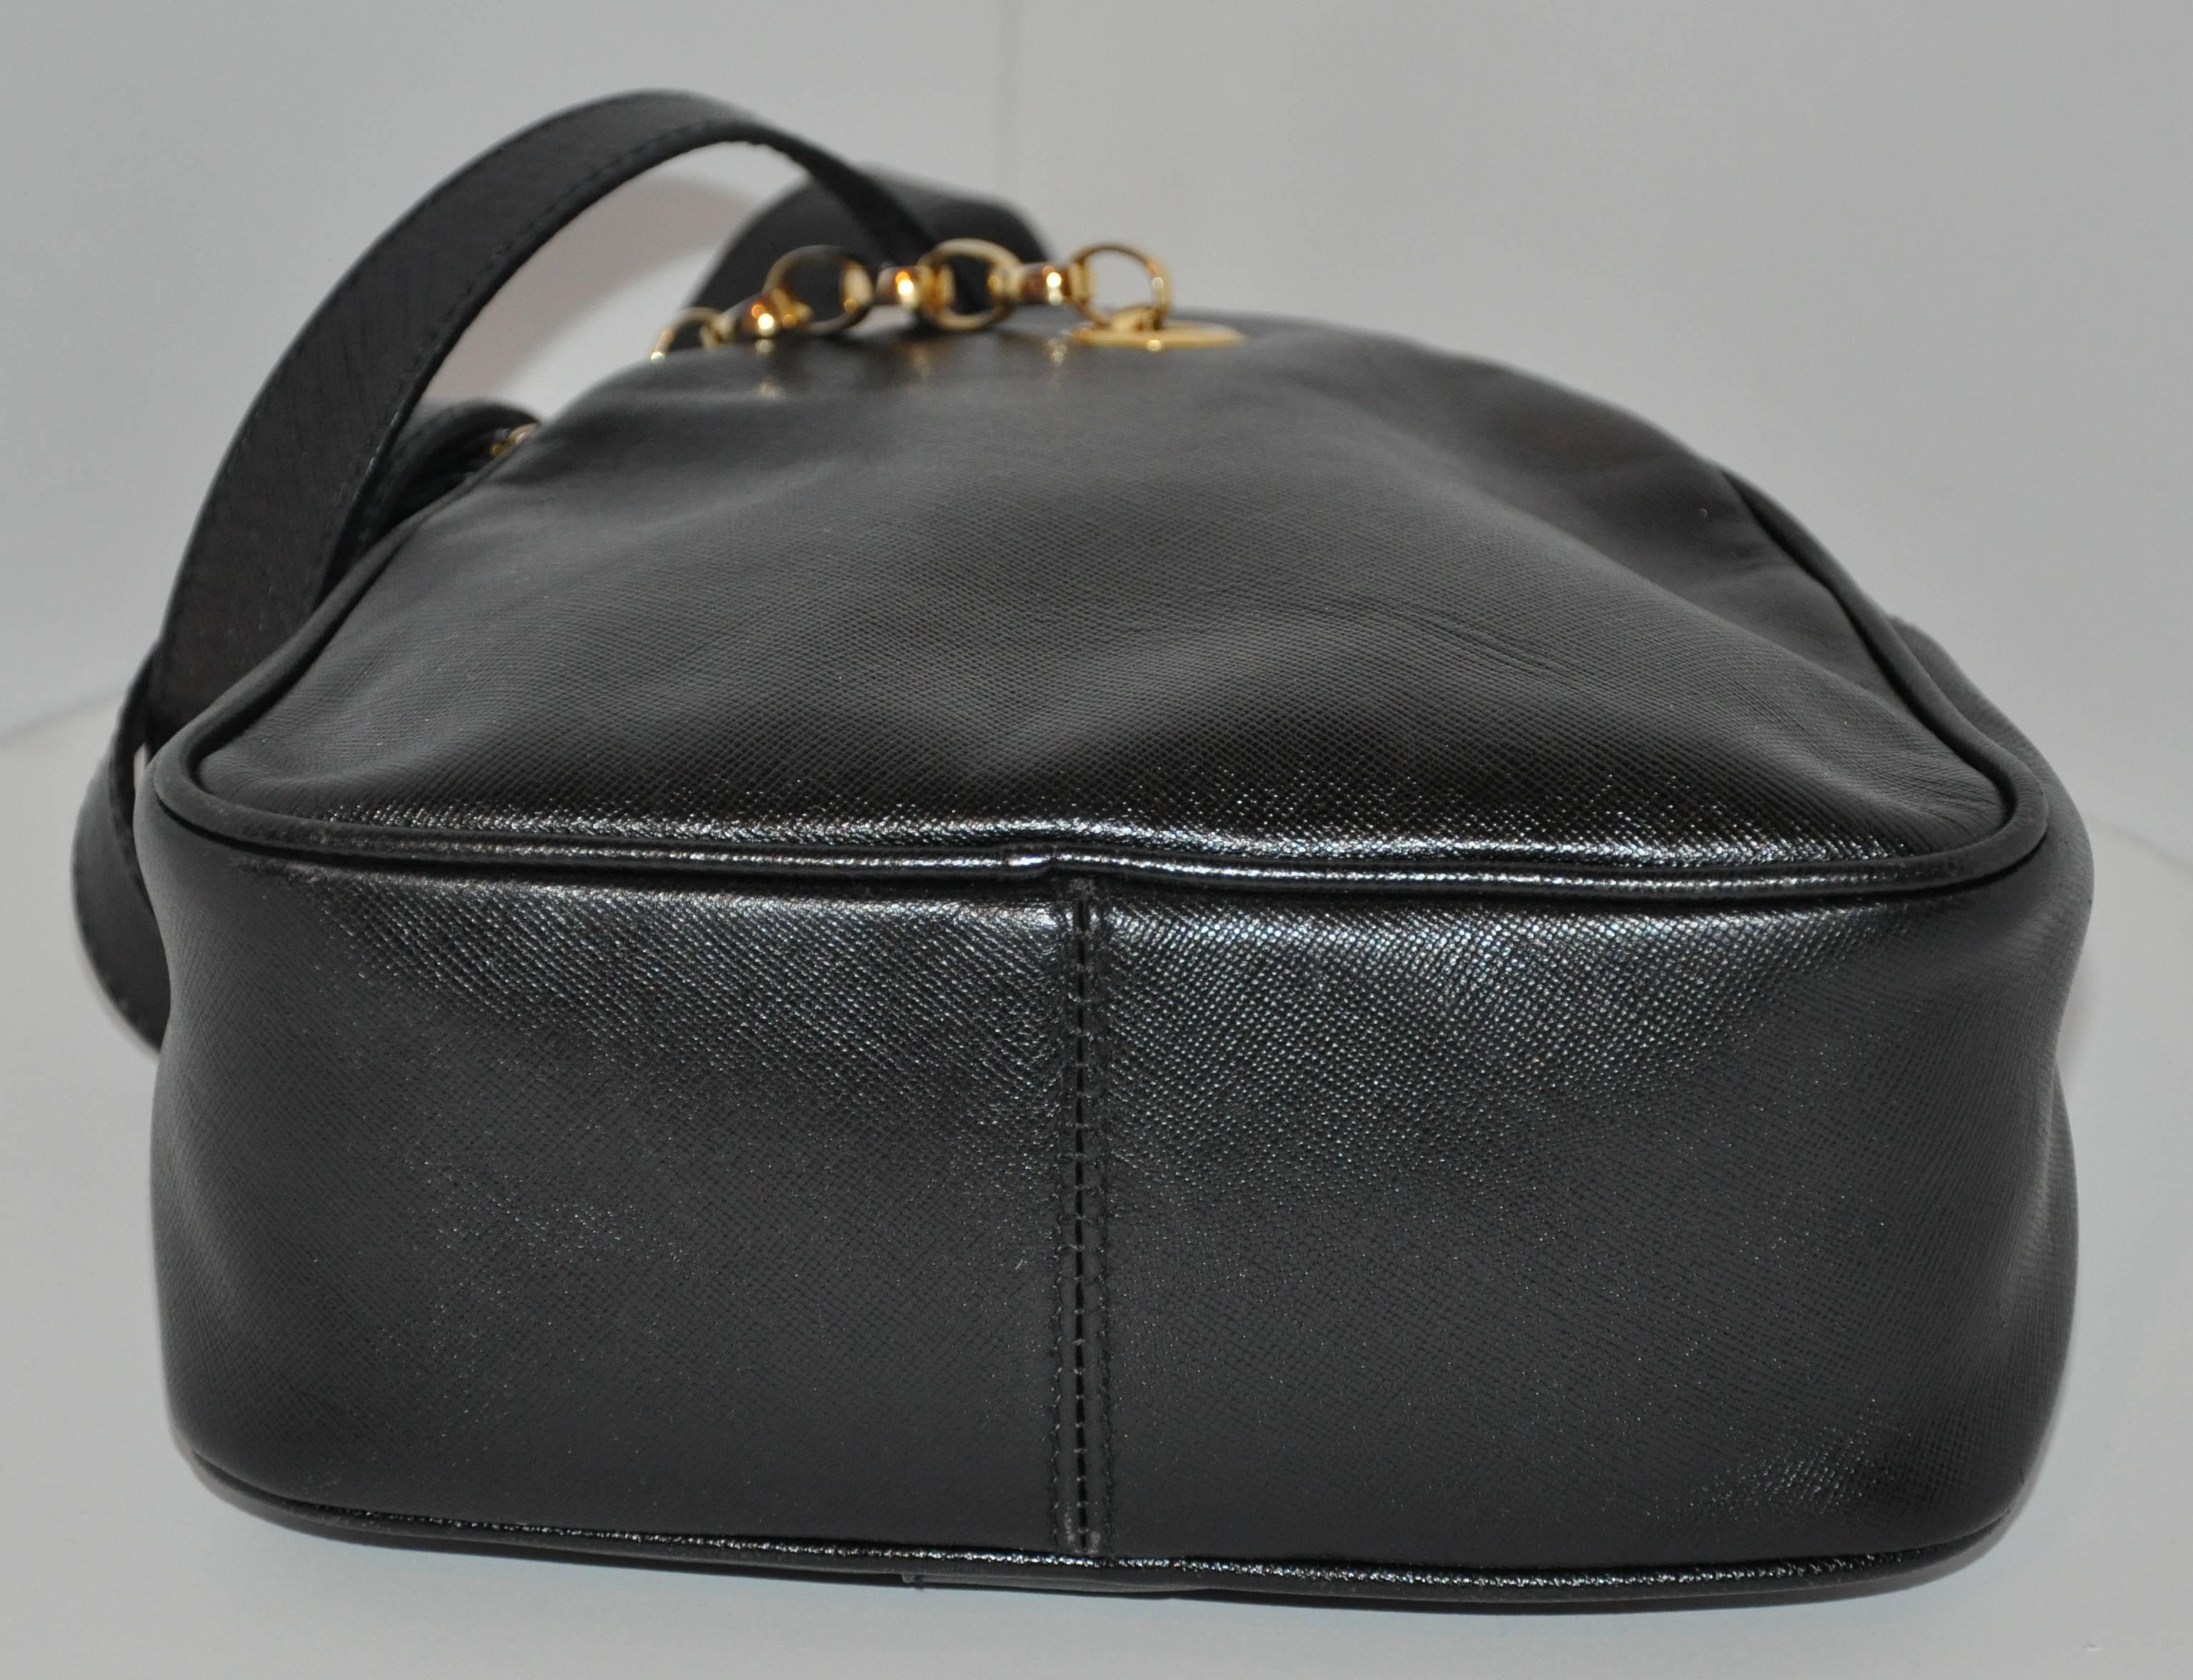 Fendi Black Textured Calfskin with Gold Hardware Small Shoulder Bag In Good Condition For Sale In New York, NY